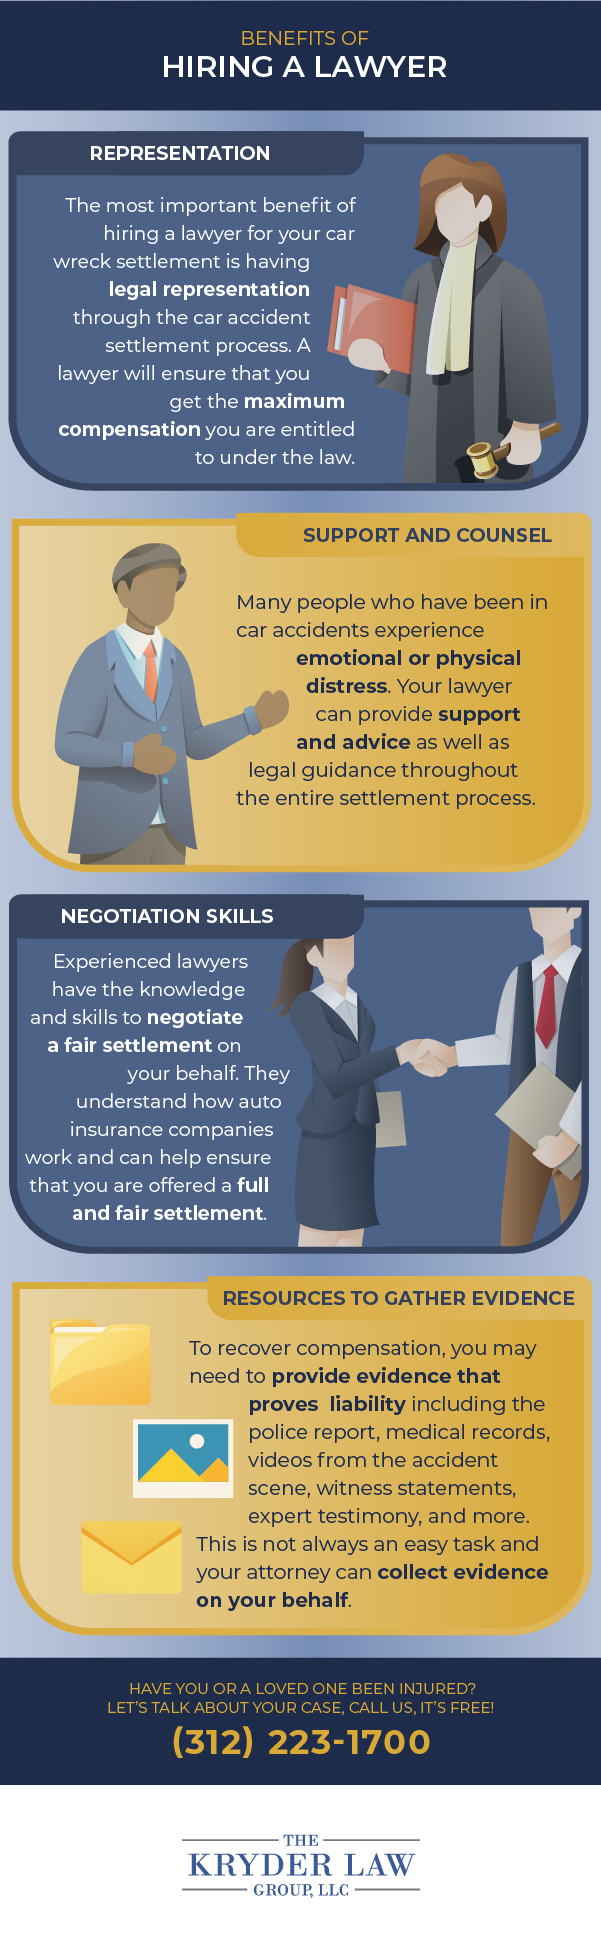 Benefits of Hiring a Lawyer for a Car Accident Settlement